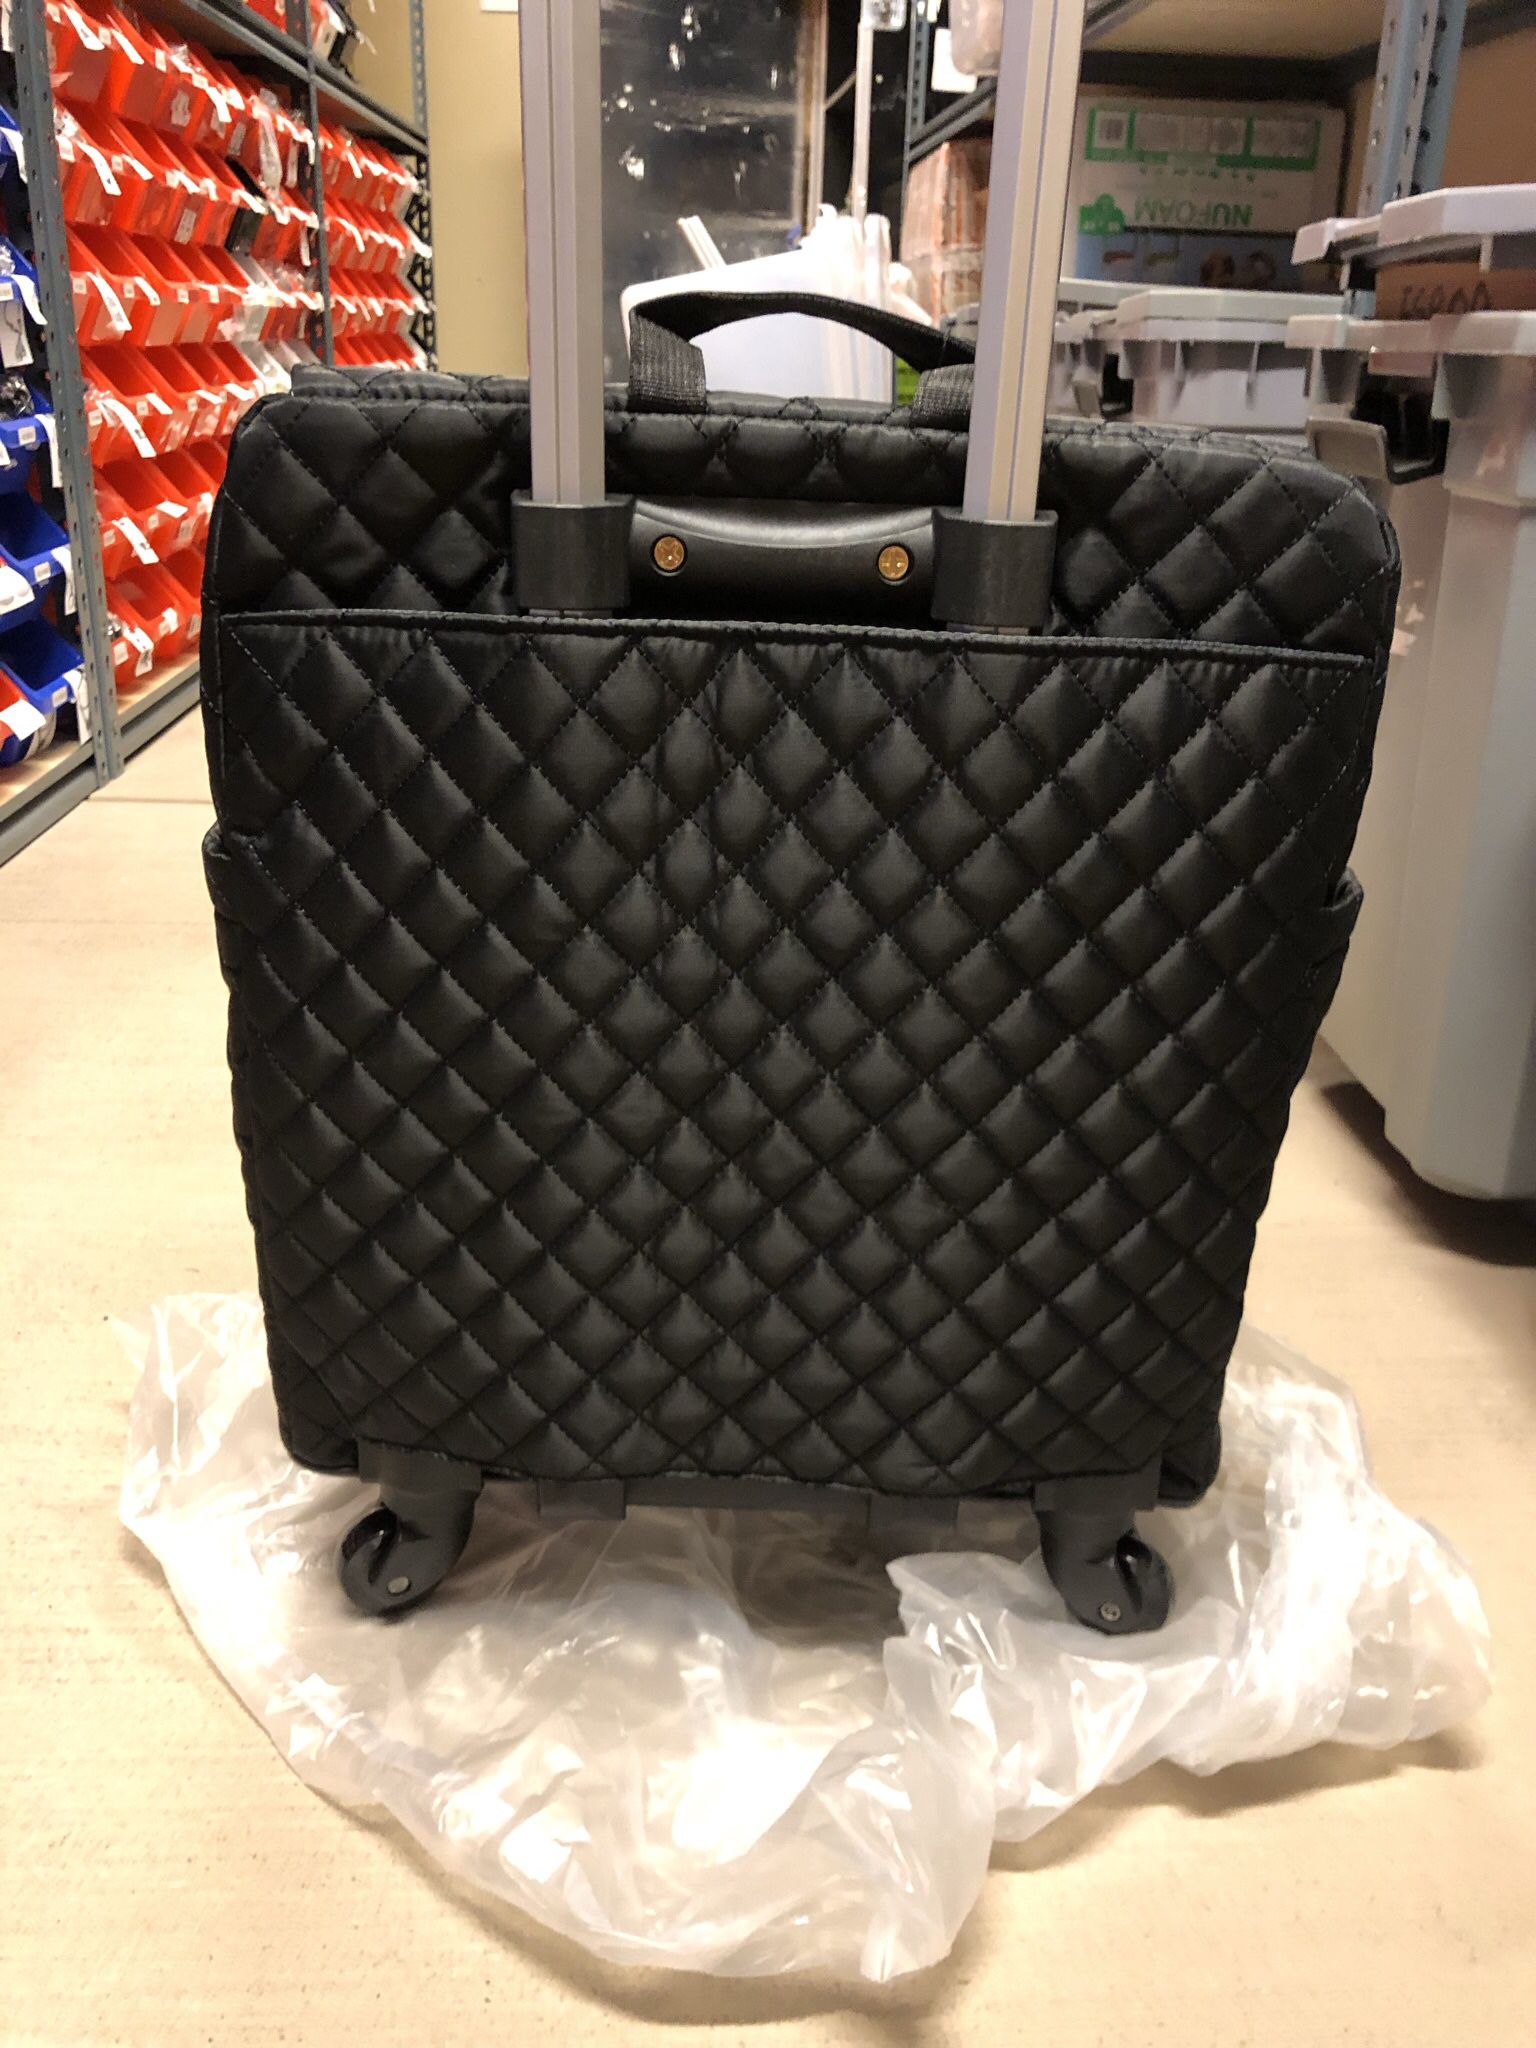 New 3 Piece Luggage for Sale in San Diego, California - OfferUp